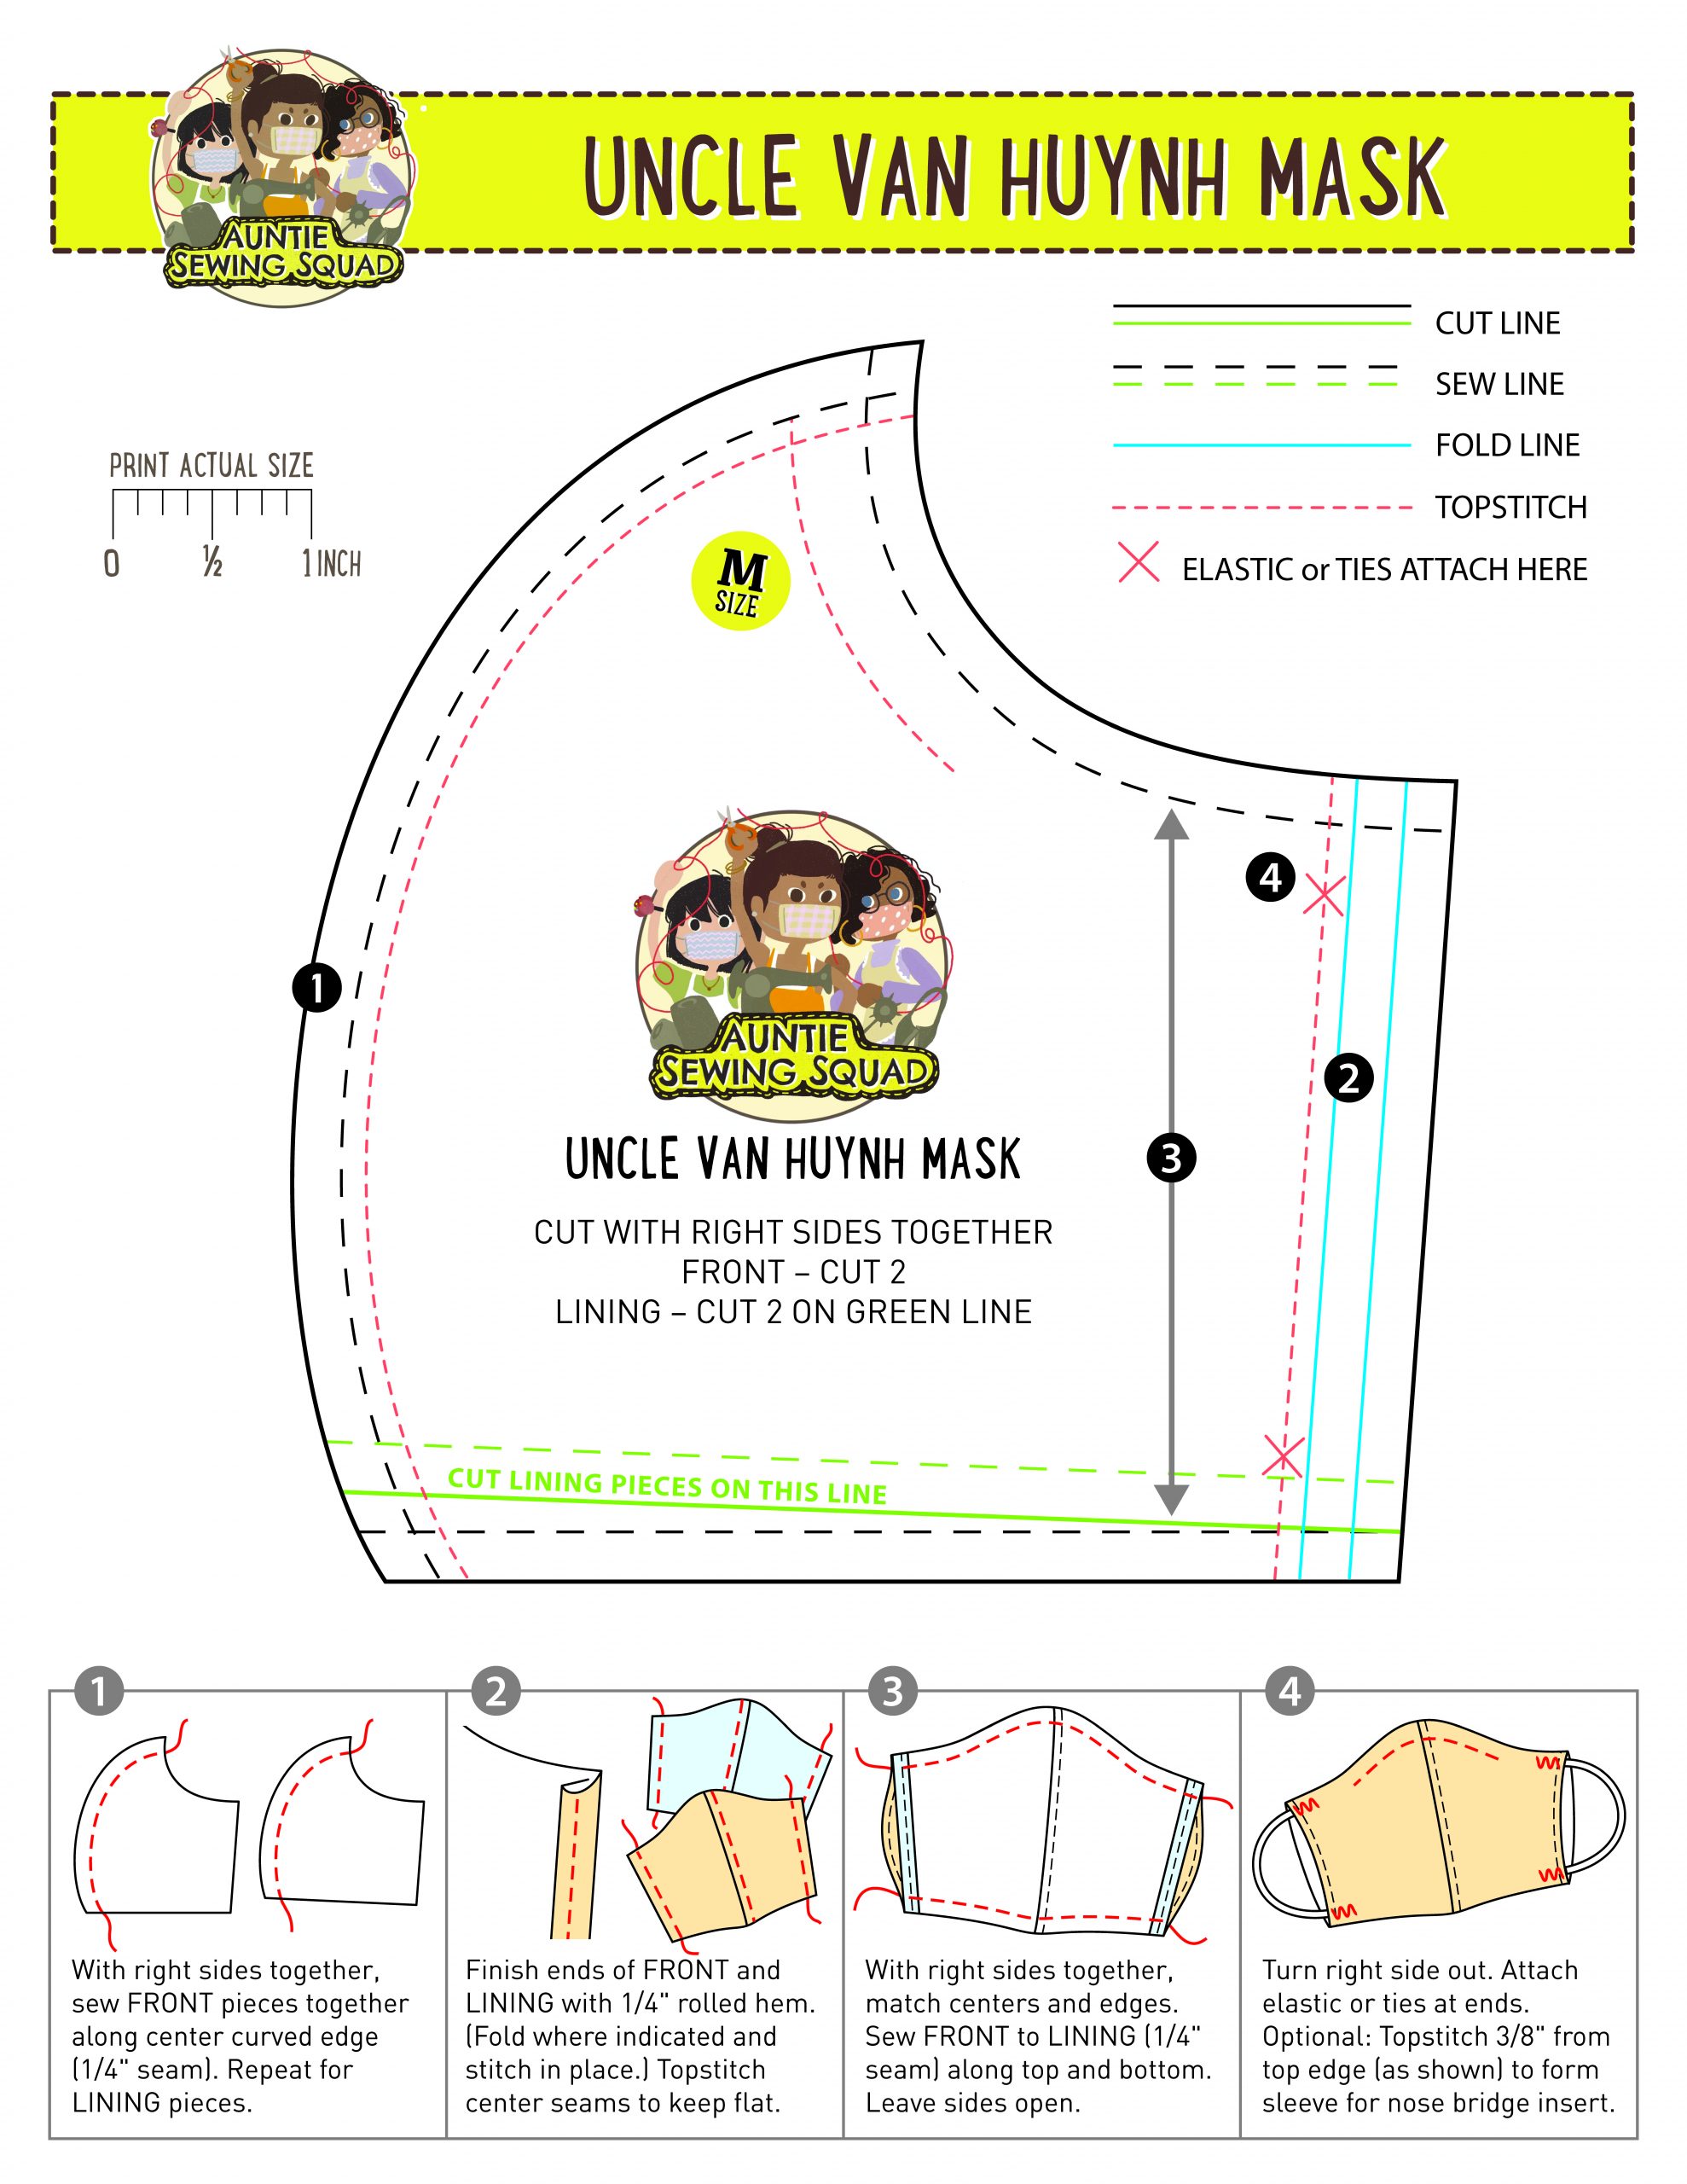 This is a vertically oriented digital illustration of a sewing pattern for a protective face mask along with step-by-step instructions. At the top of the design the title “Uncle Van Huyn Mask” is written in brown letters against a yellow banner. A logo for the Auntie Sewing Squad is reproduced in both the upper left-hand corner of the banner and in the center of the composition inside of the main sewing stencil illustration. The logo consists of three women of color in various complexions wearing protective masks and holding up a red thread and needle in an empowered fist. At the bottom of this design are 4 panels with detailed instructions.